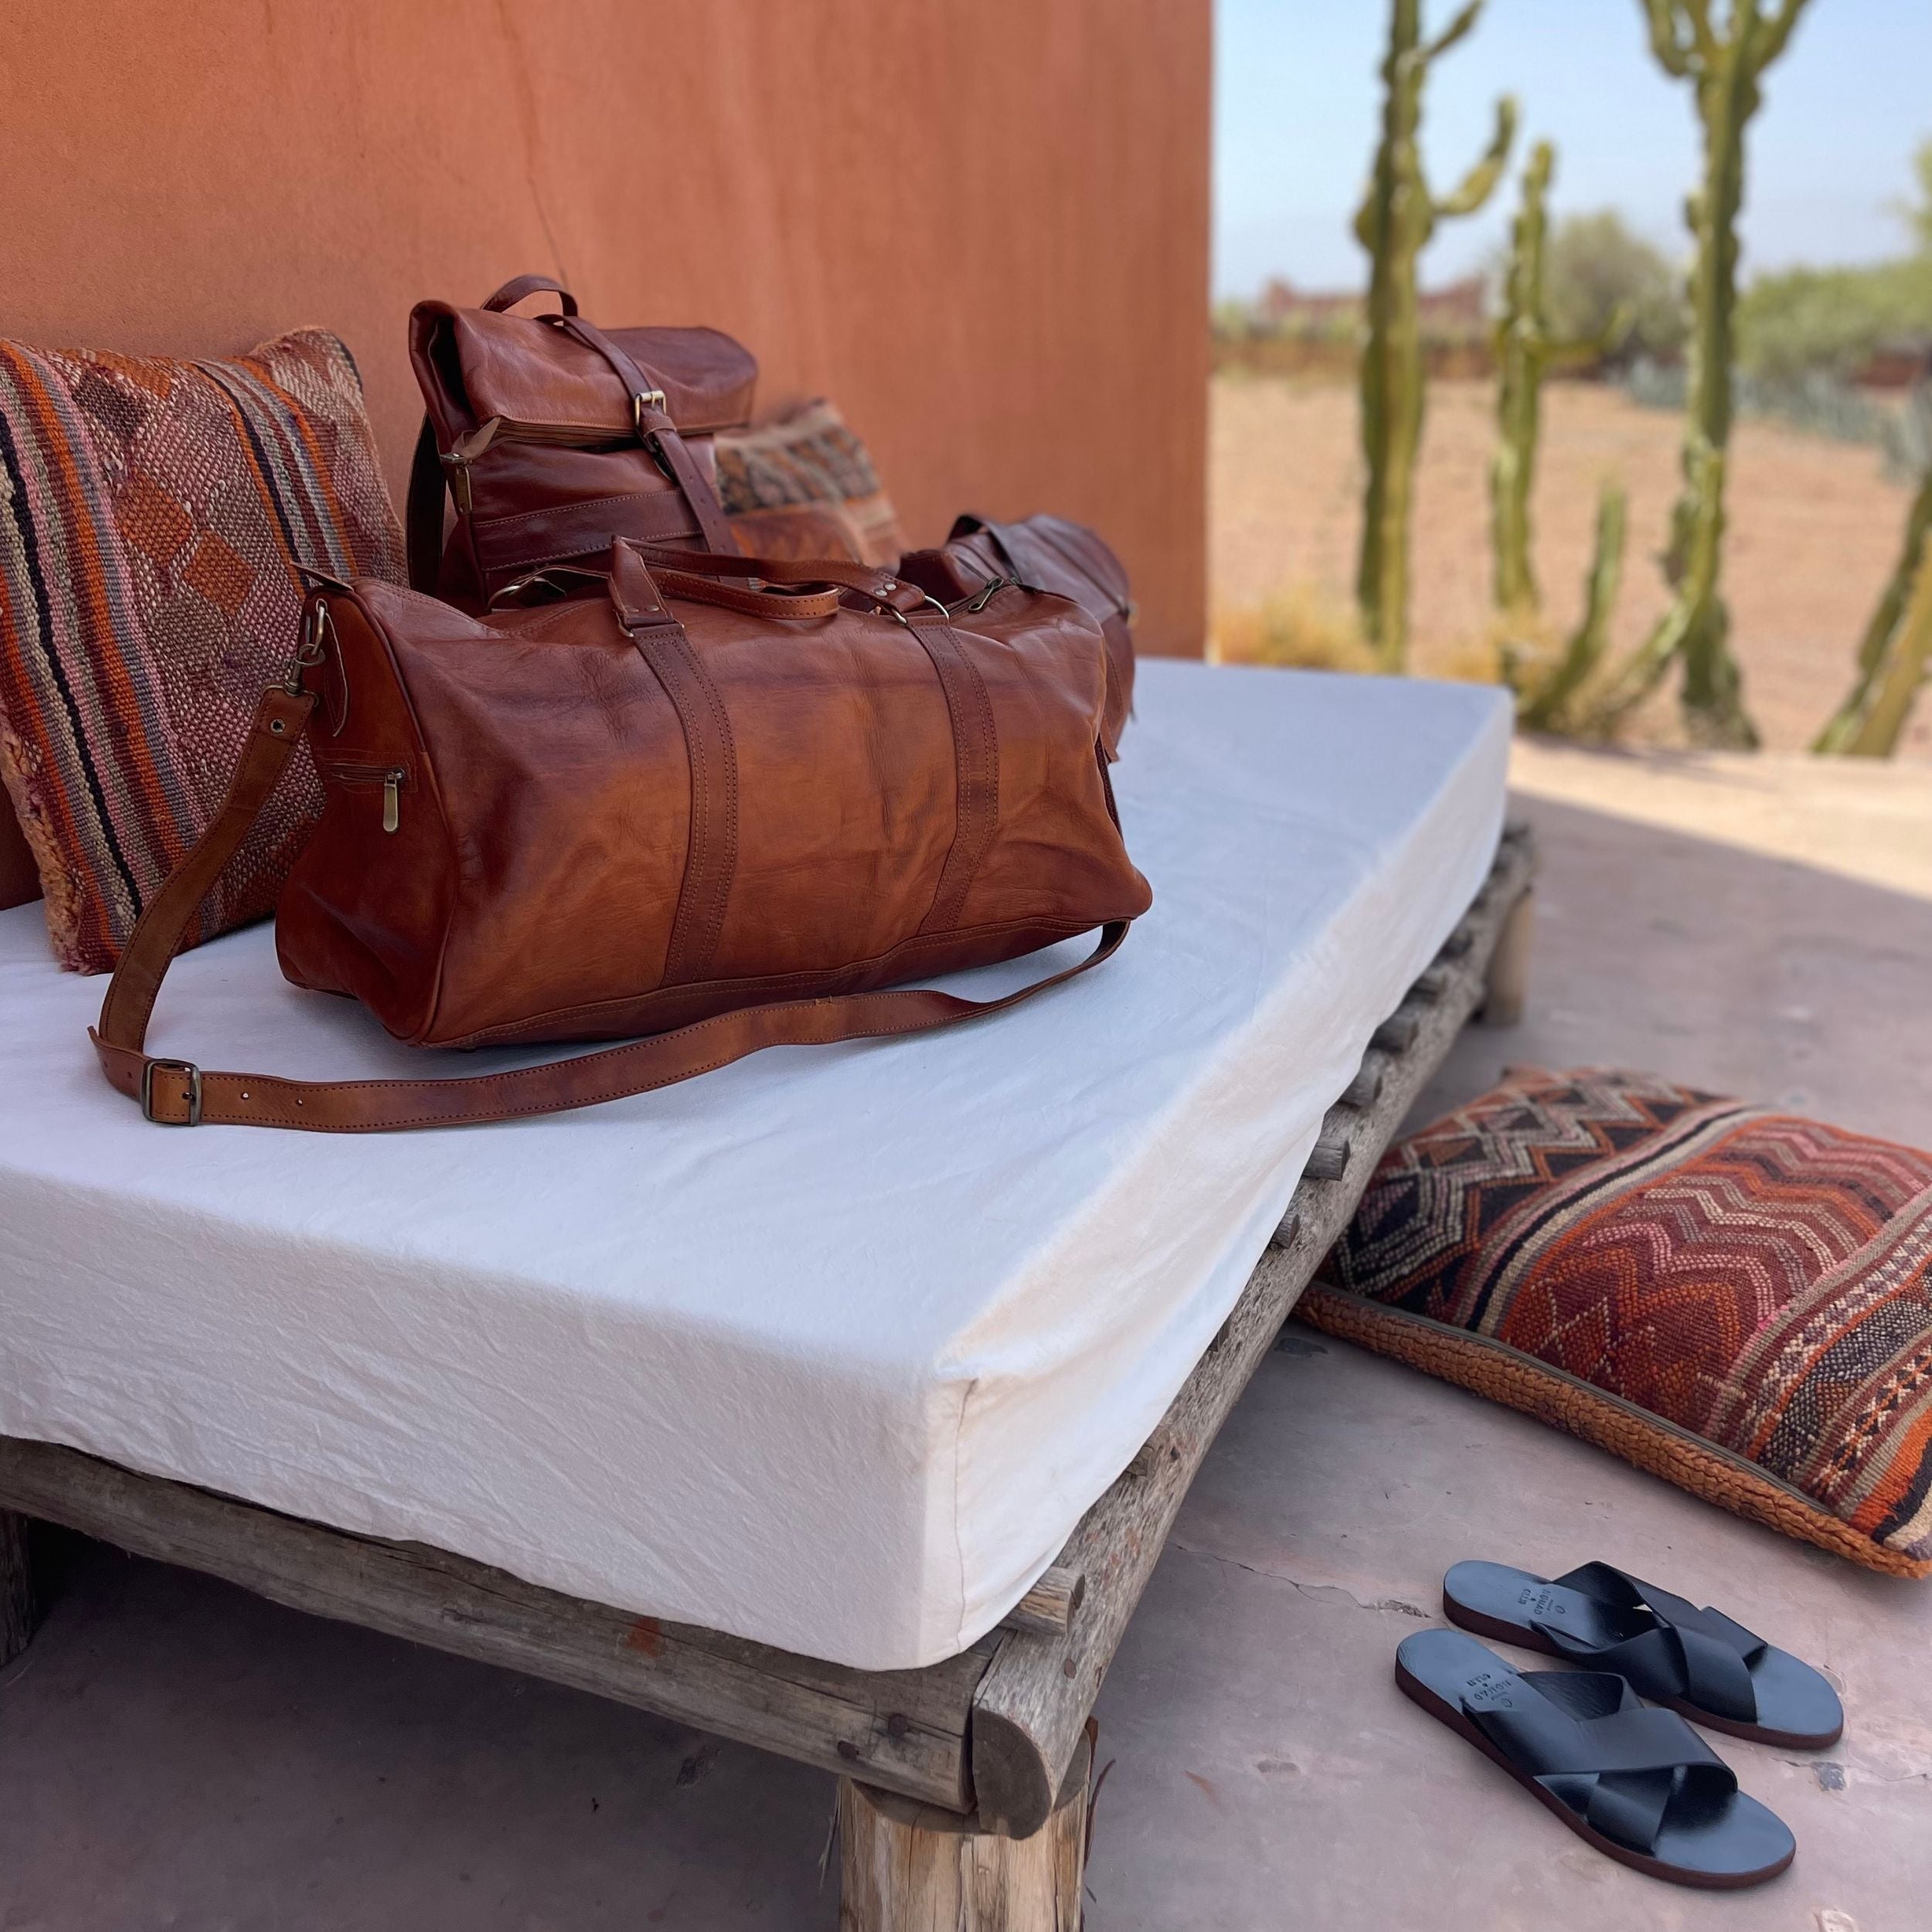 Leather Travel Goods - Bags, Footwear & Accessories - Nouvelle Nomad